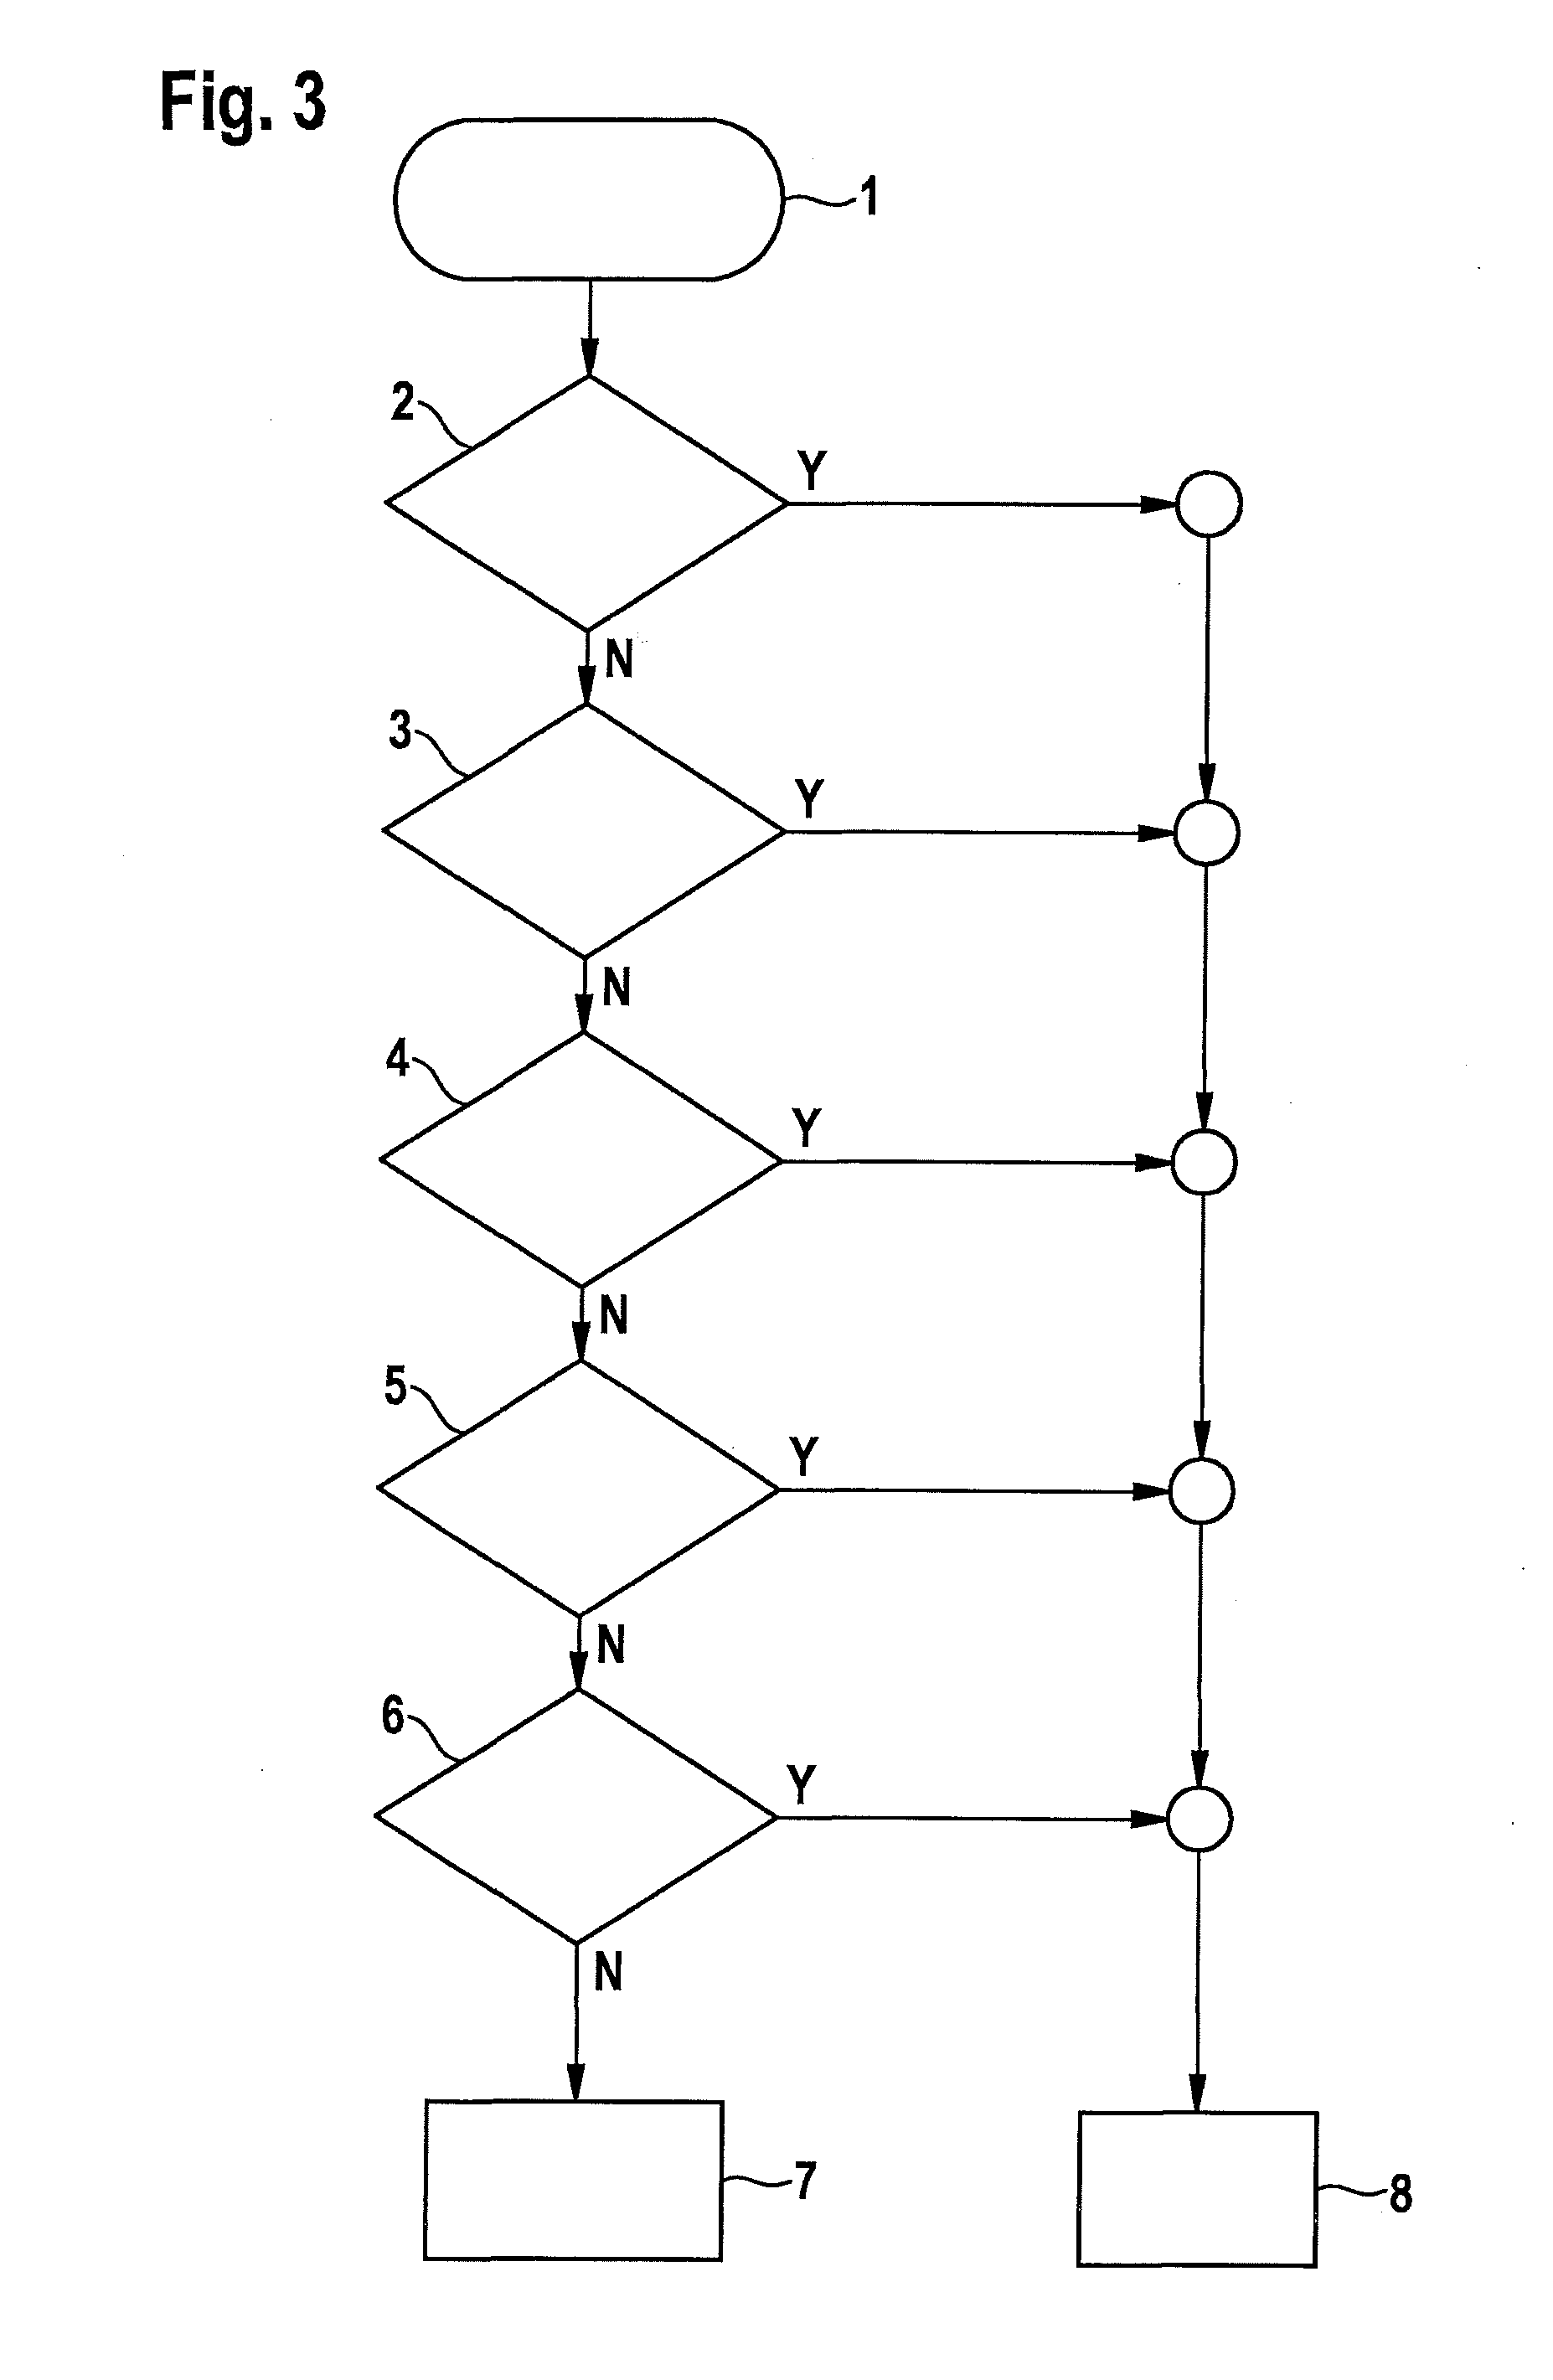 Method for determining a failure in a service or parking brake in a vehicle, regulating or control unit for carrying out the method, and parking brake having such a regulating or control unit